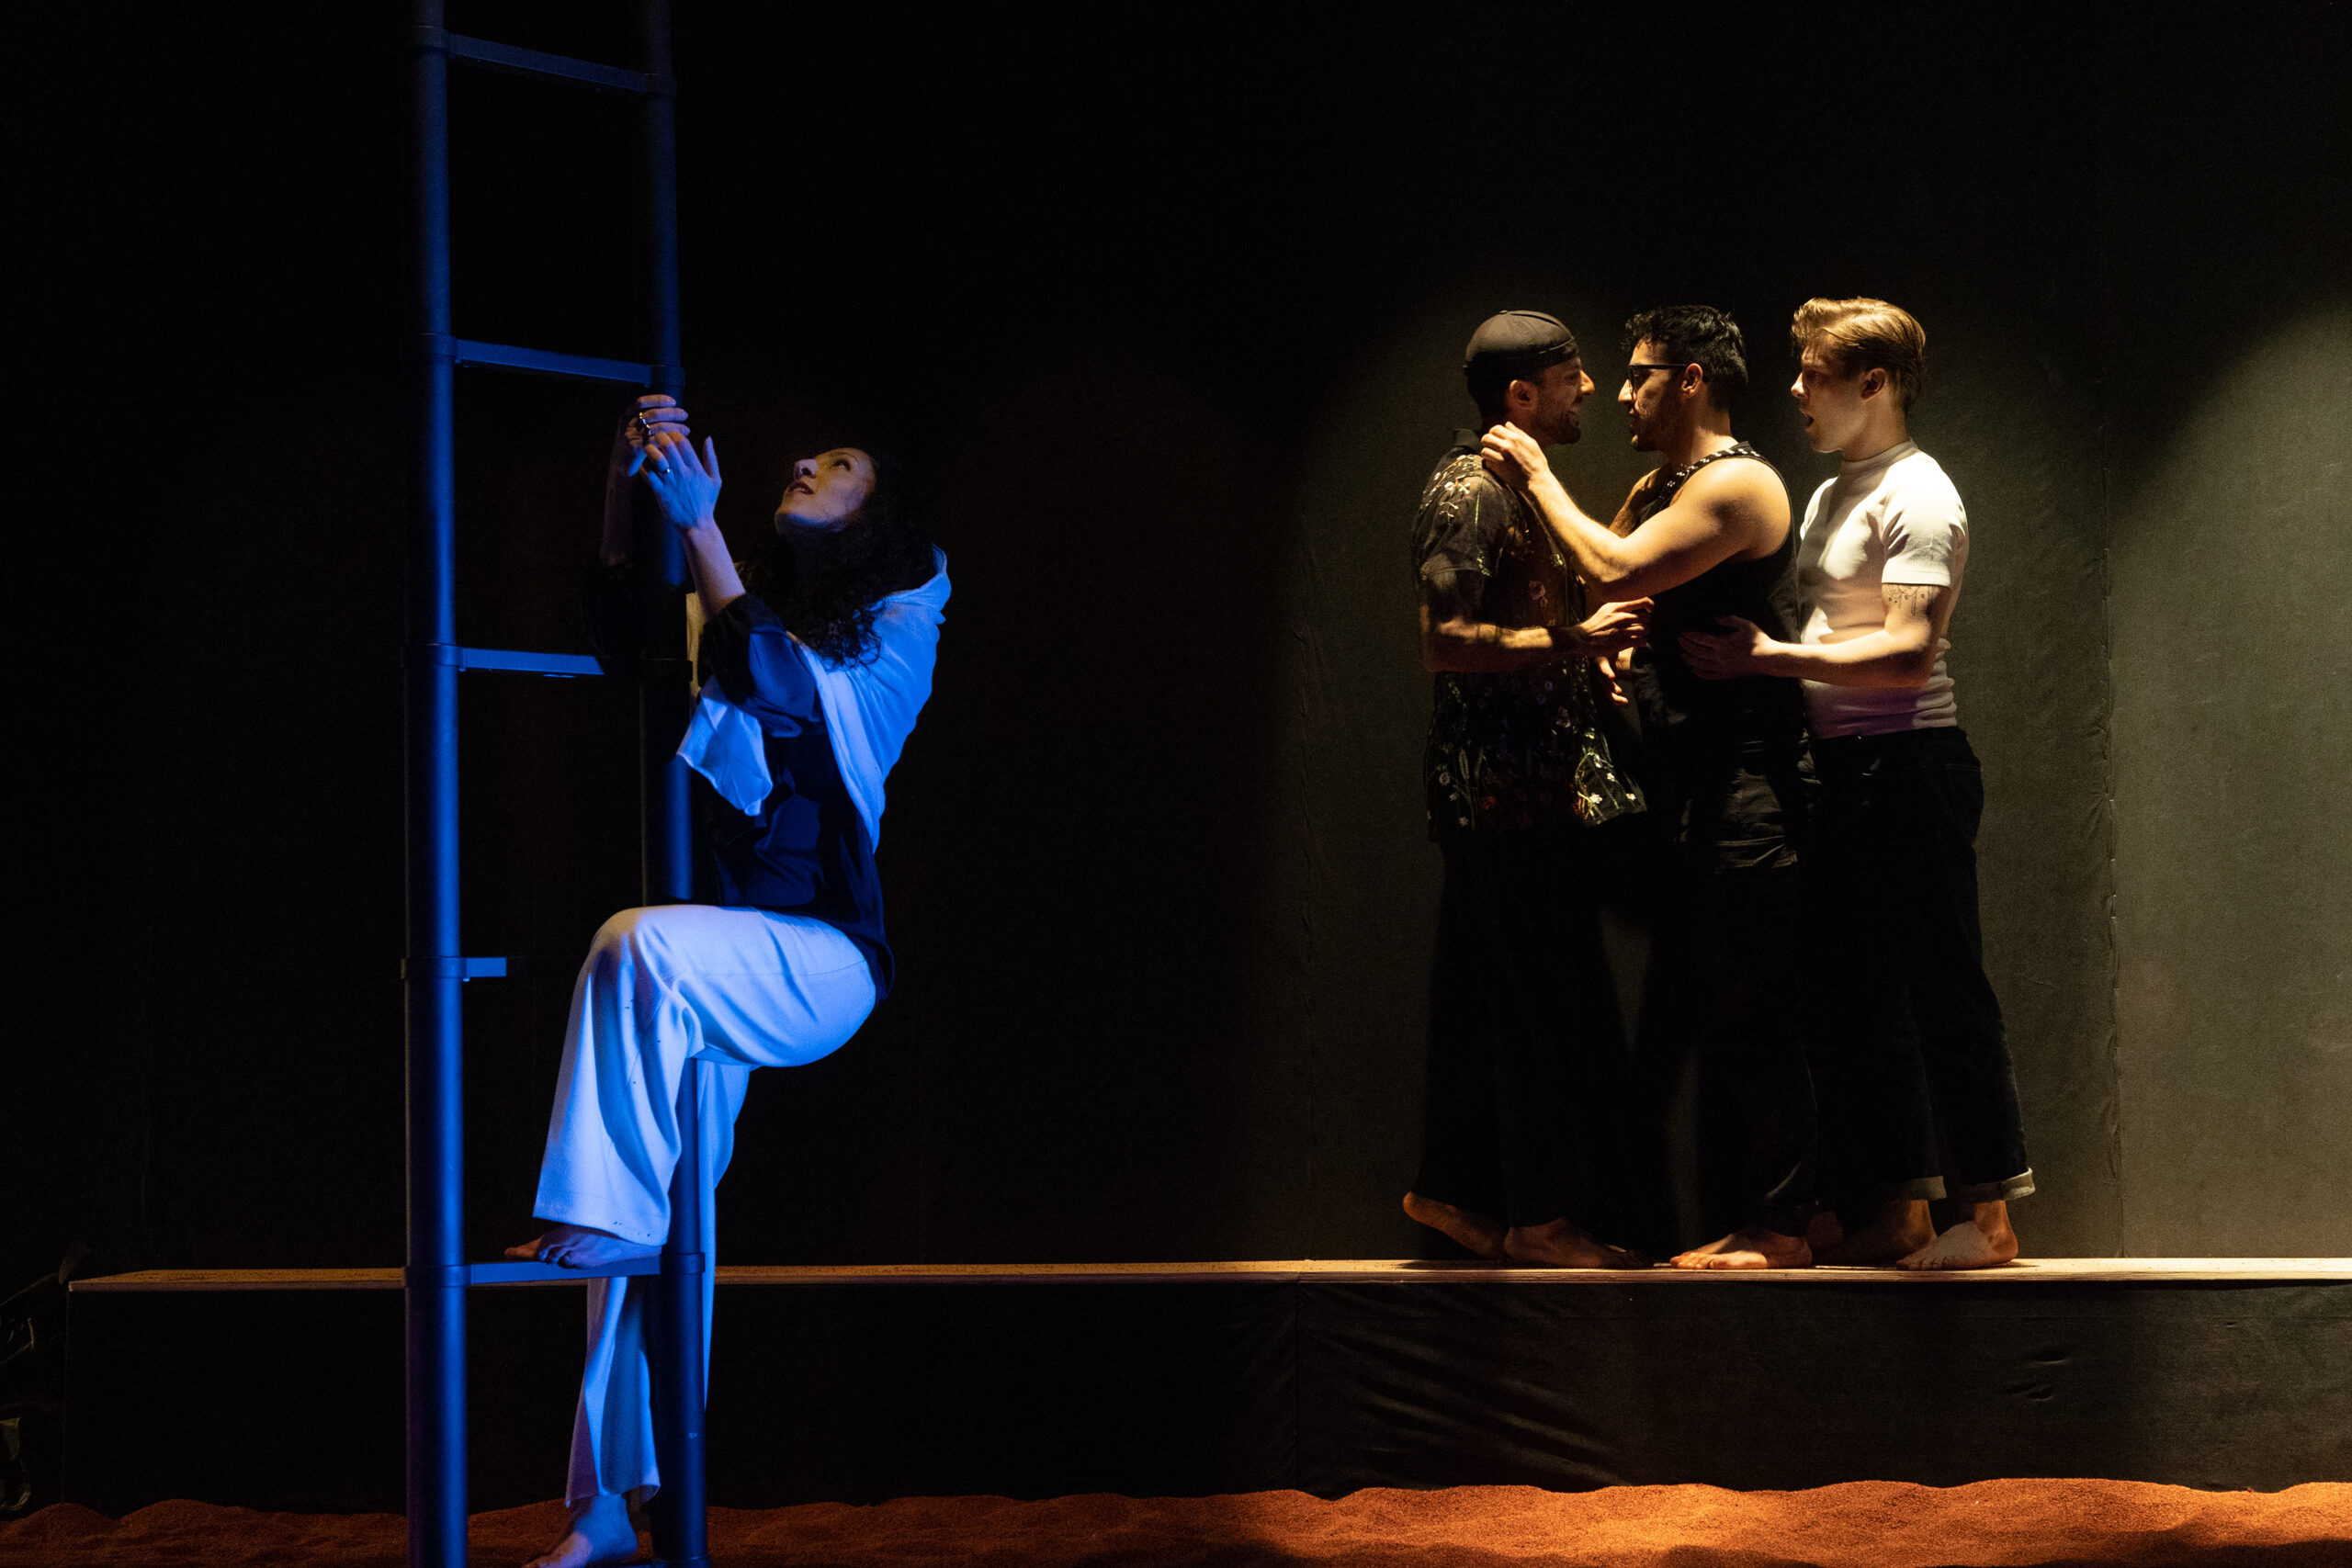 A woman climbs a ladder on the left side of the image. On the right, three men embrace in a dimly lit scene.